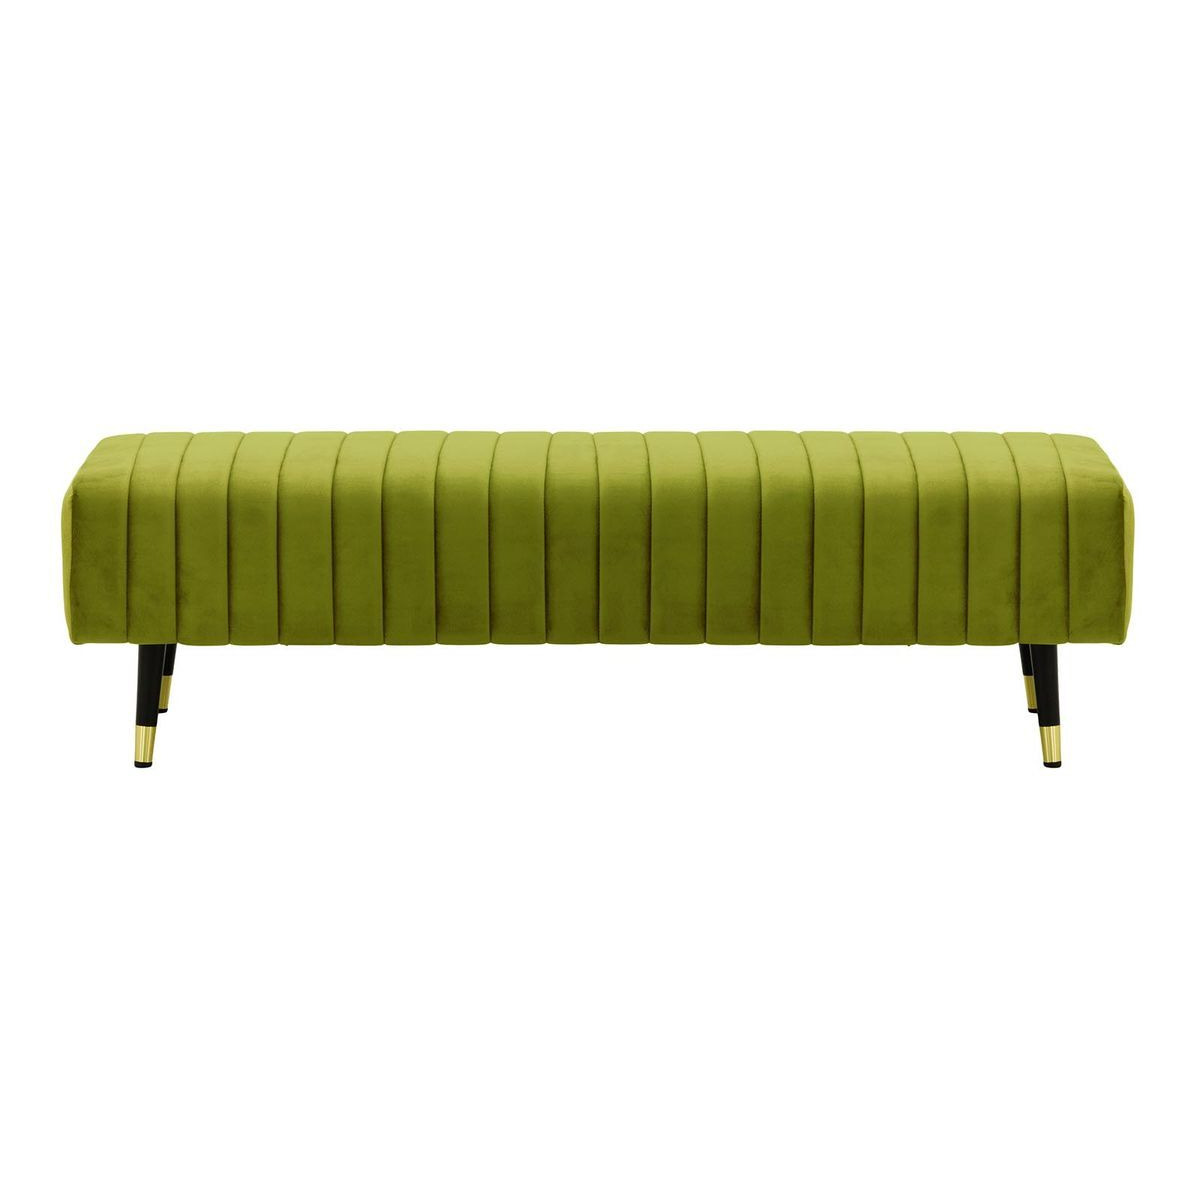 Slender Footstool with quilting, olive green - image 1